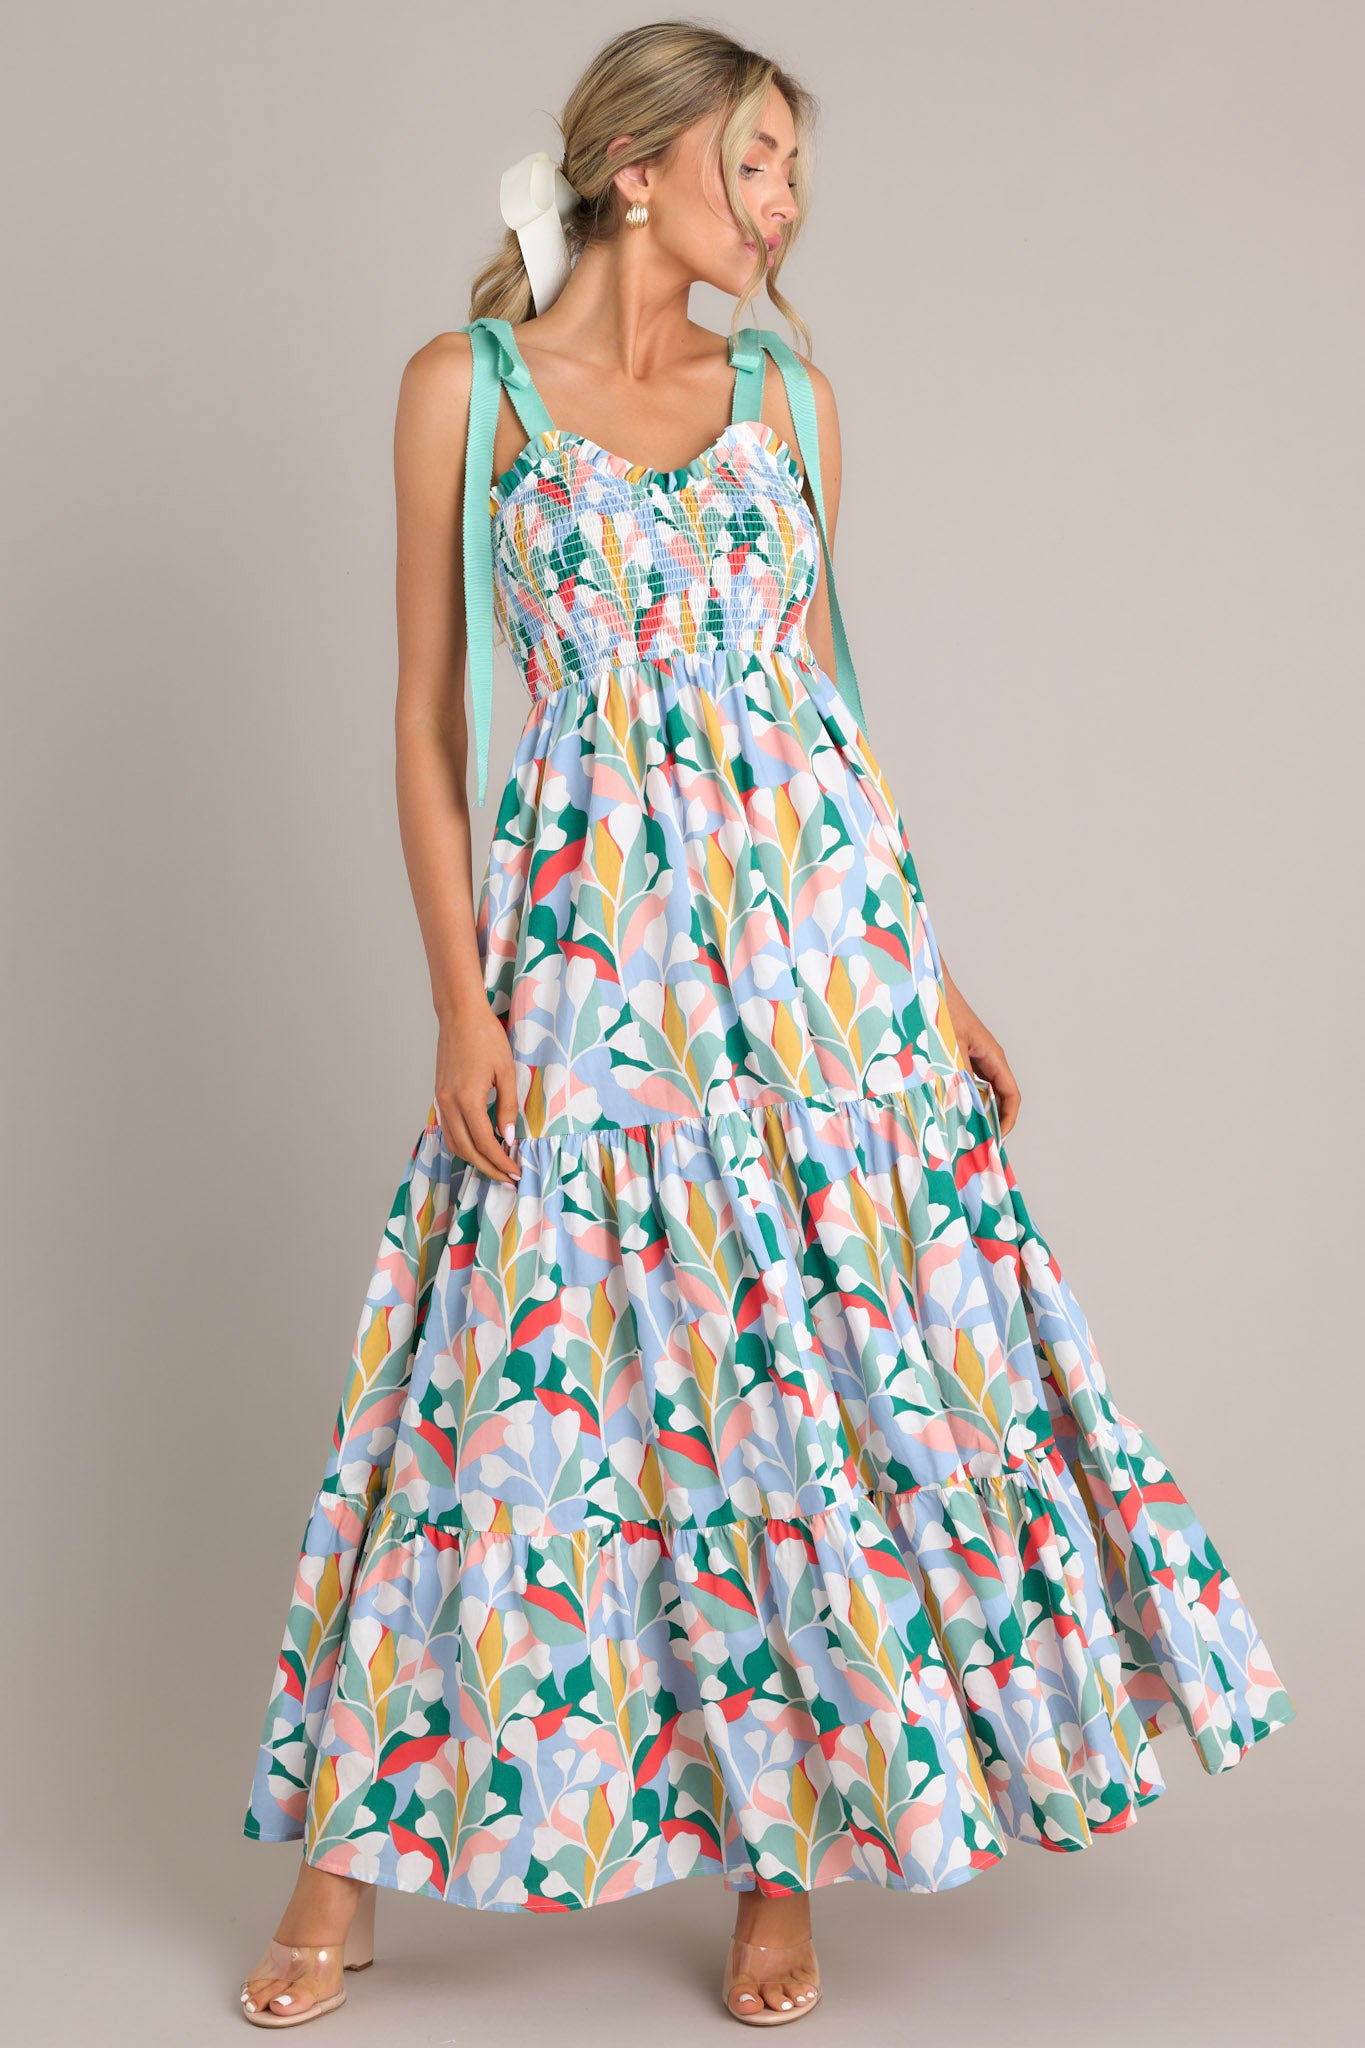 Full front view of this cotton dress that features a sweetheart neckline with ruffle detailing, adjustable self-tie shoulder straps, a smocked bodice, and a long, tiered skirt.